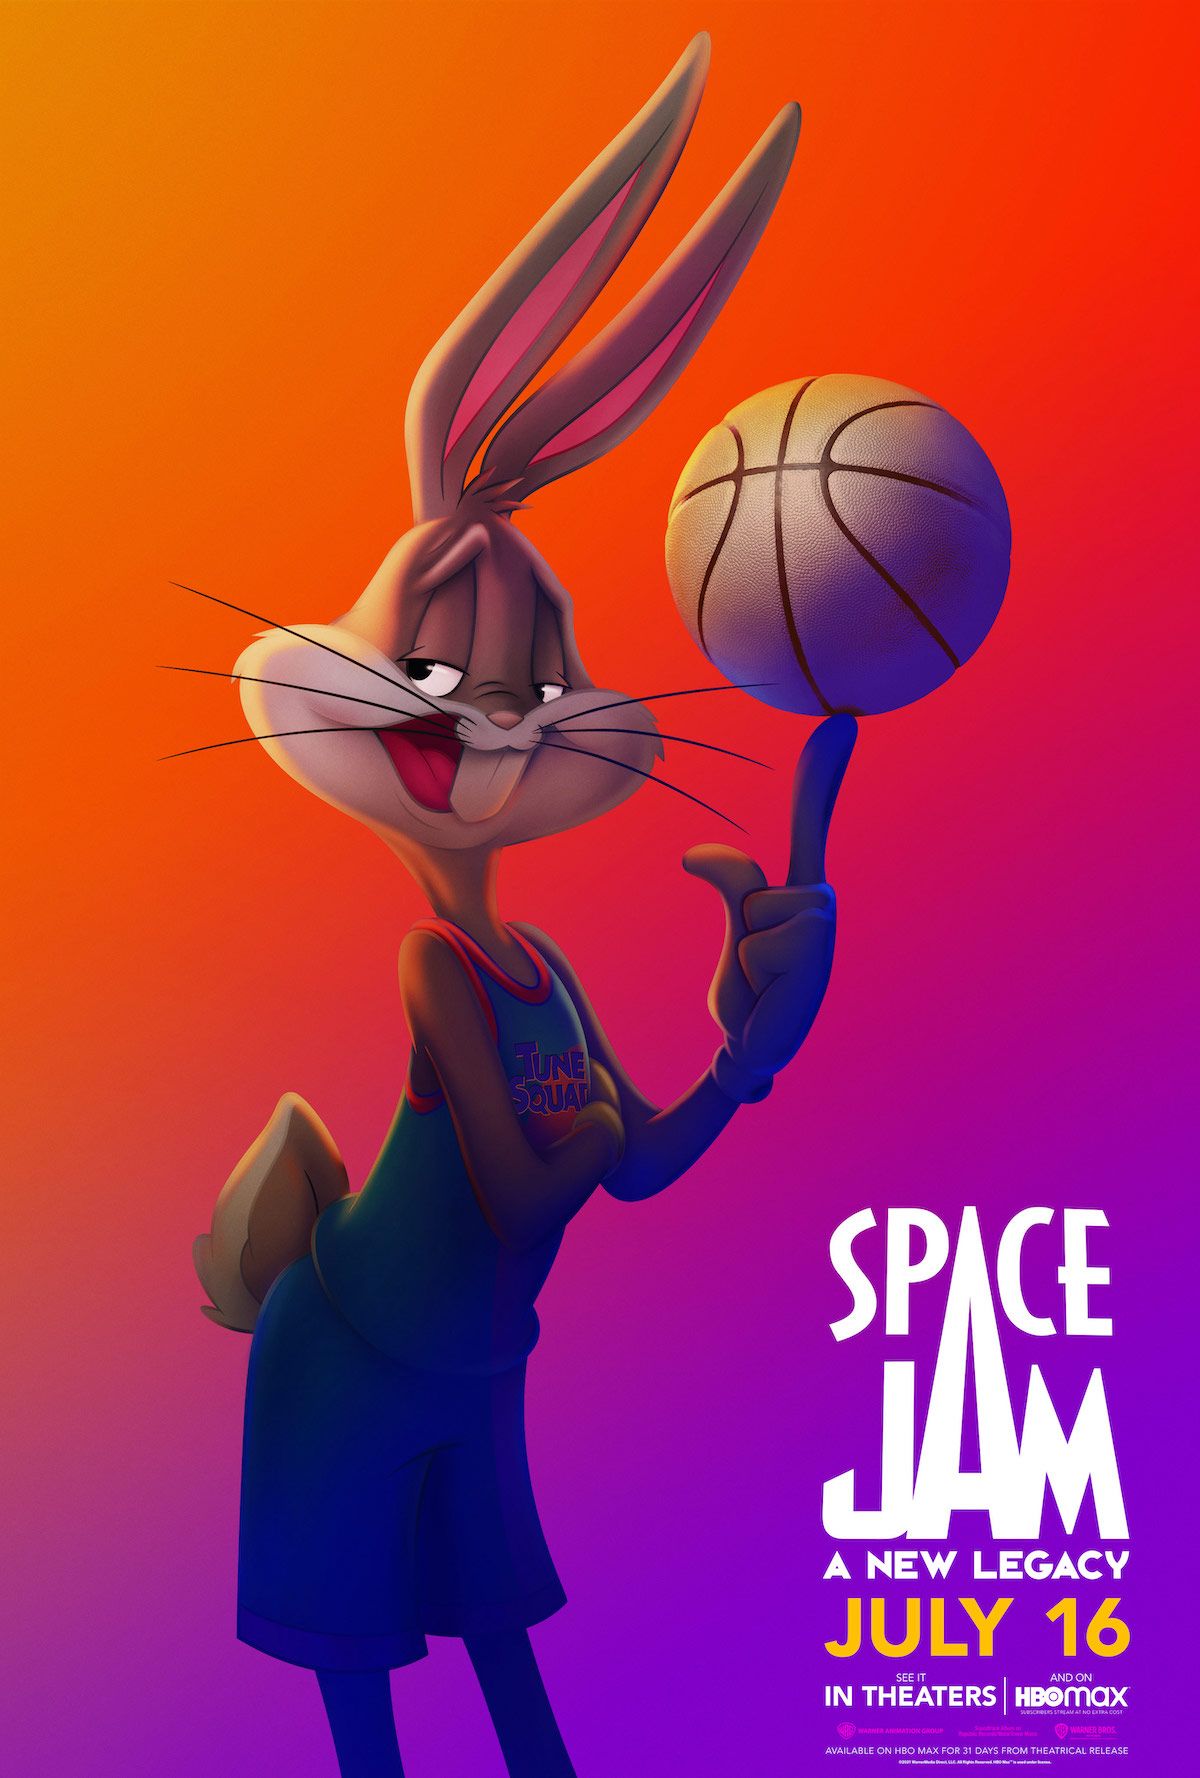 Bugs Bunny Space Jam 2: A New Legacy character poster